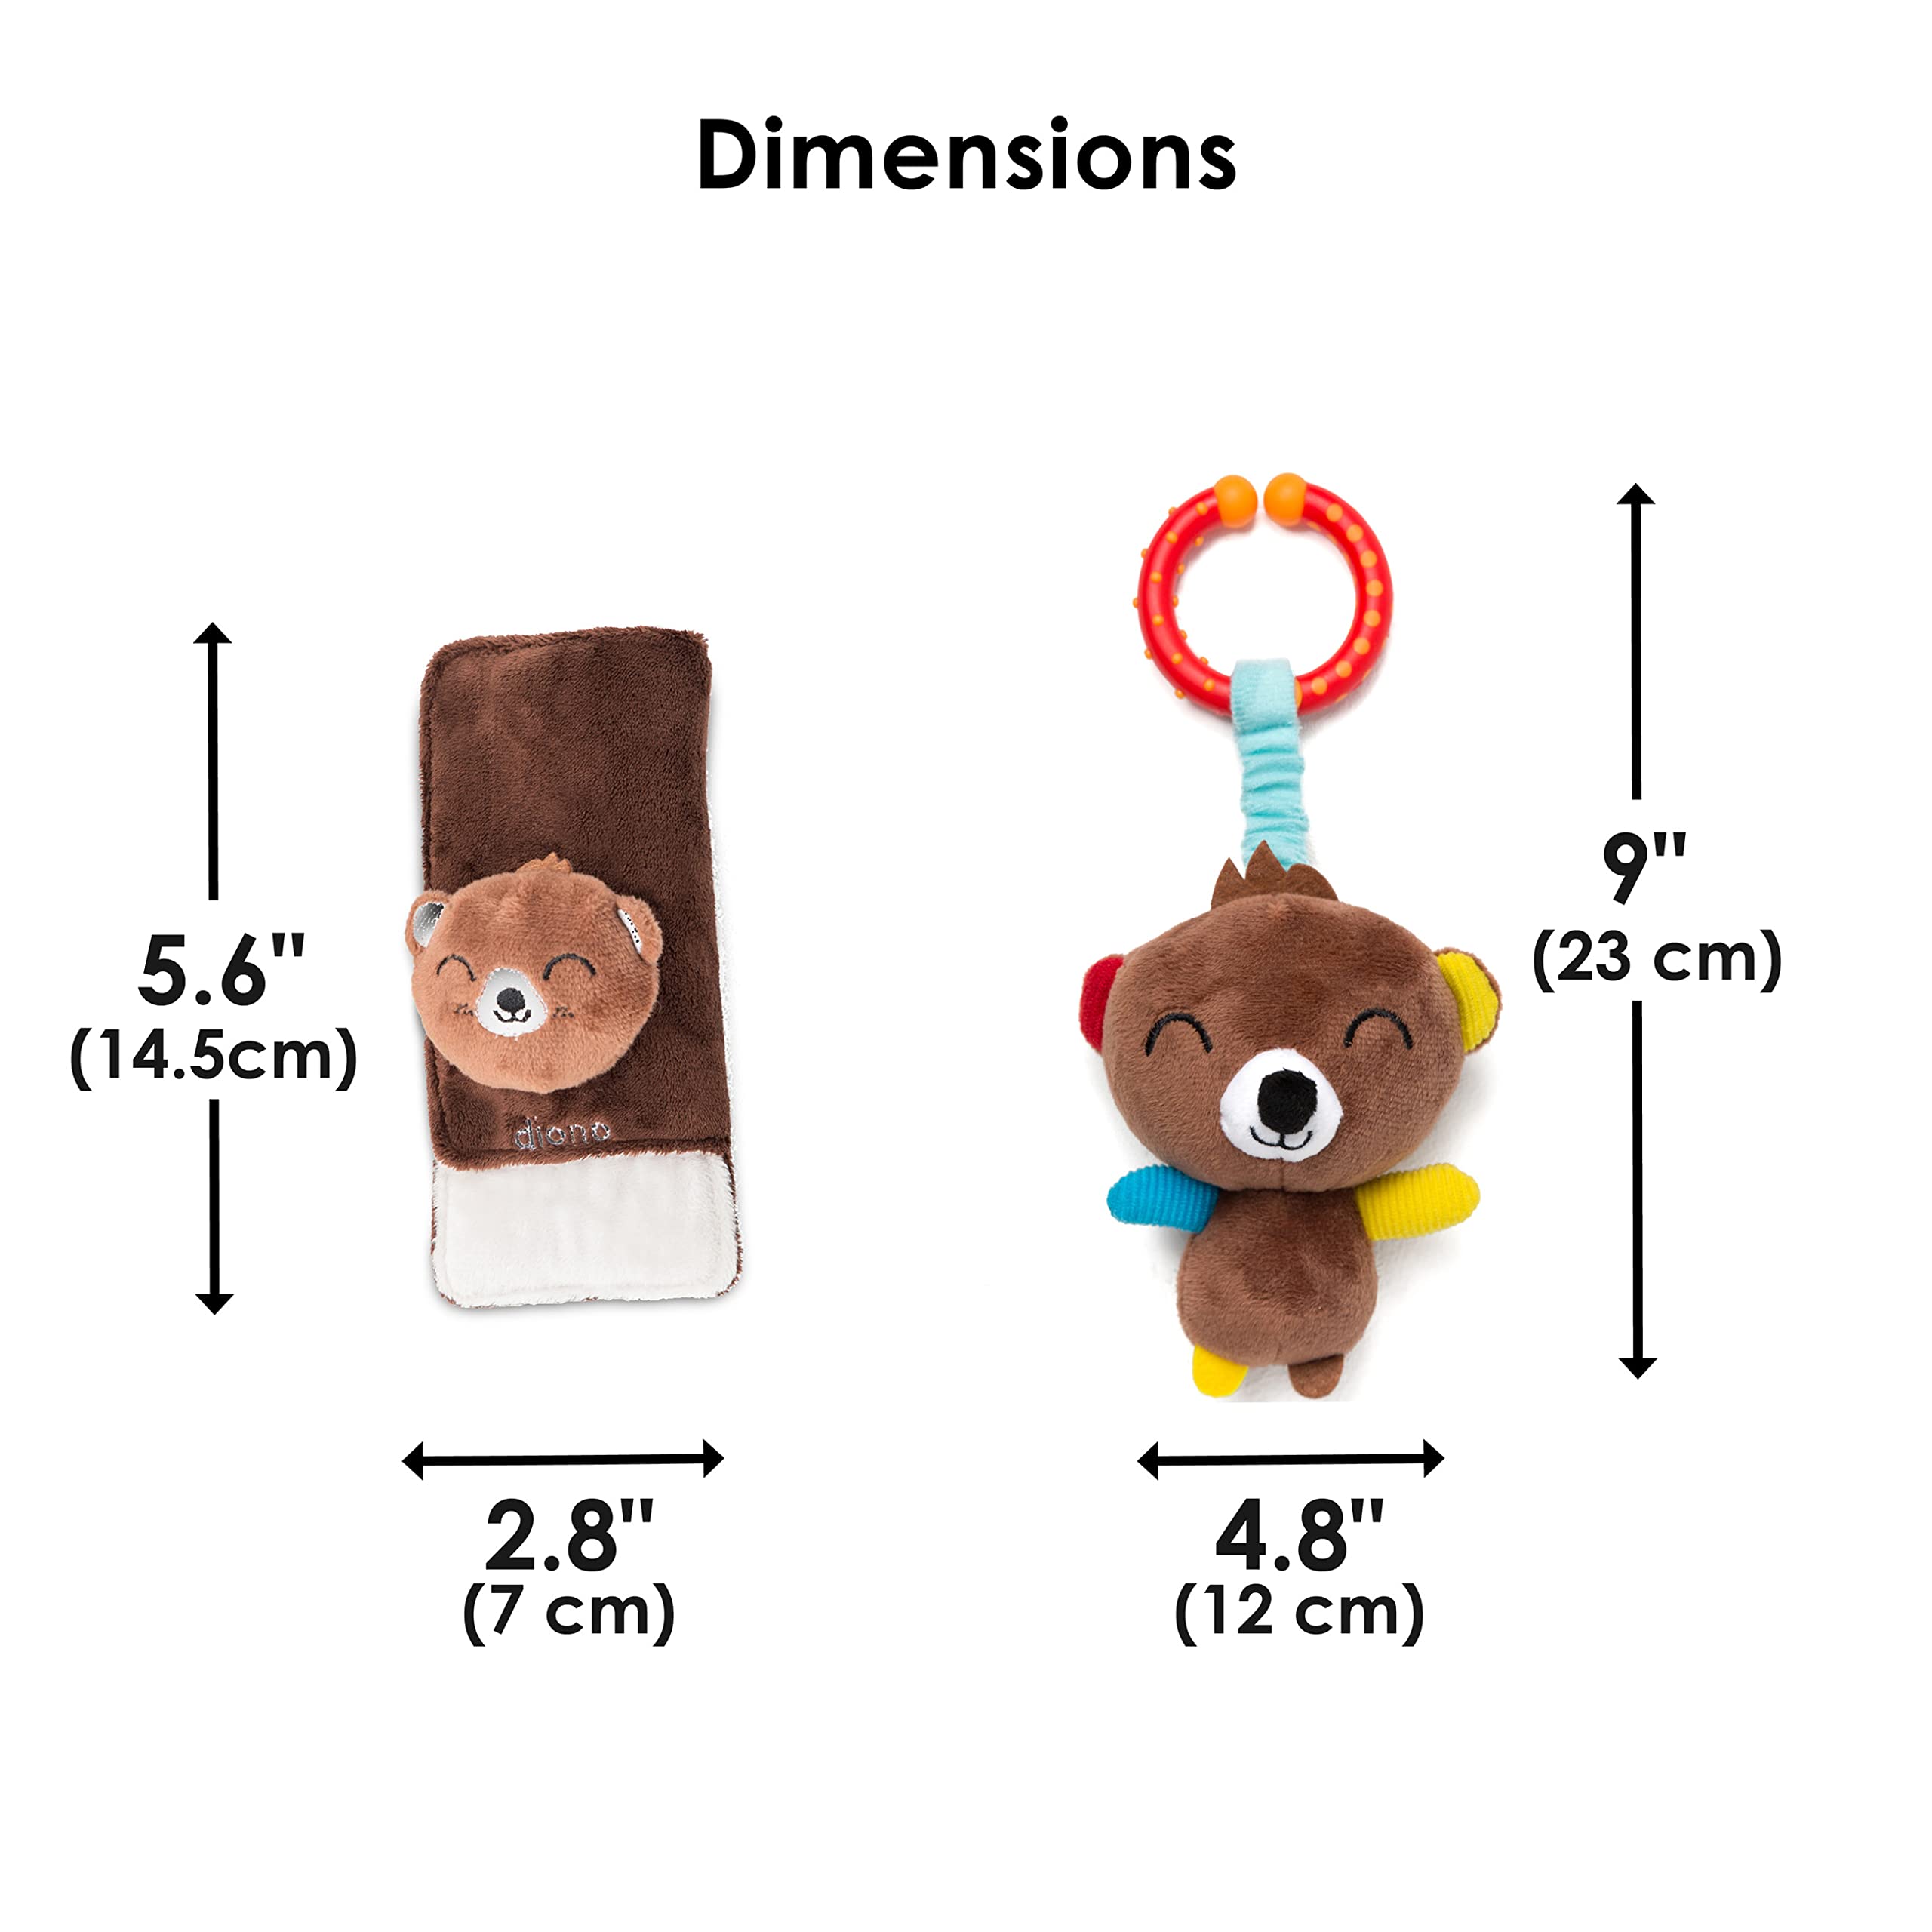 Diono Baby Bear Character Car Seat Straps & Toy, Shoulder Pads for Baby, Infant, Toddler, 2 Pack Soft Seat Belt Cushion and Stroller Harness Covers Helps Prevent Strap Irritation